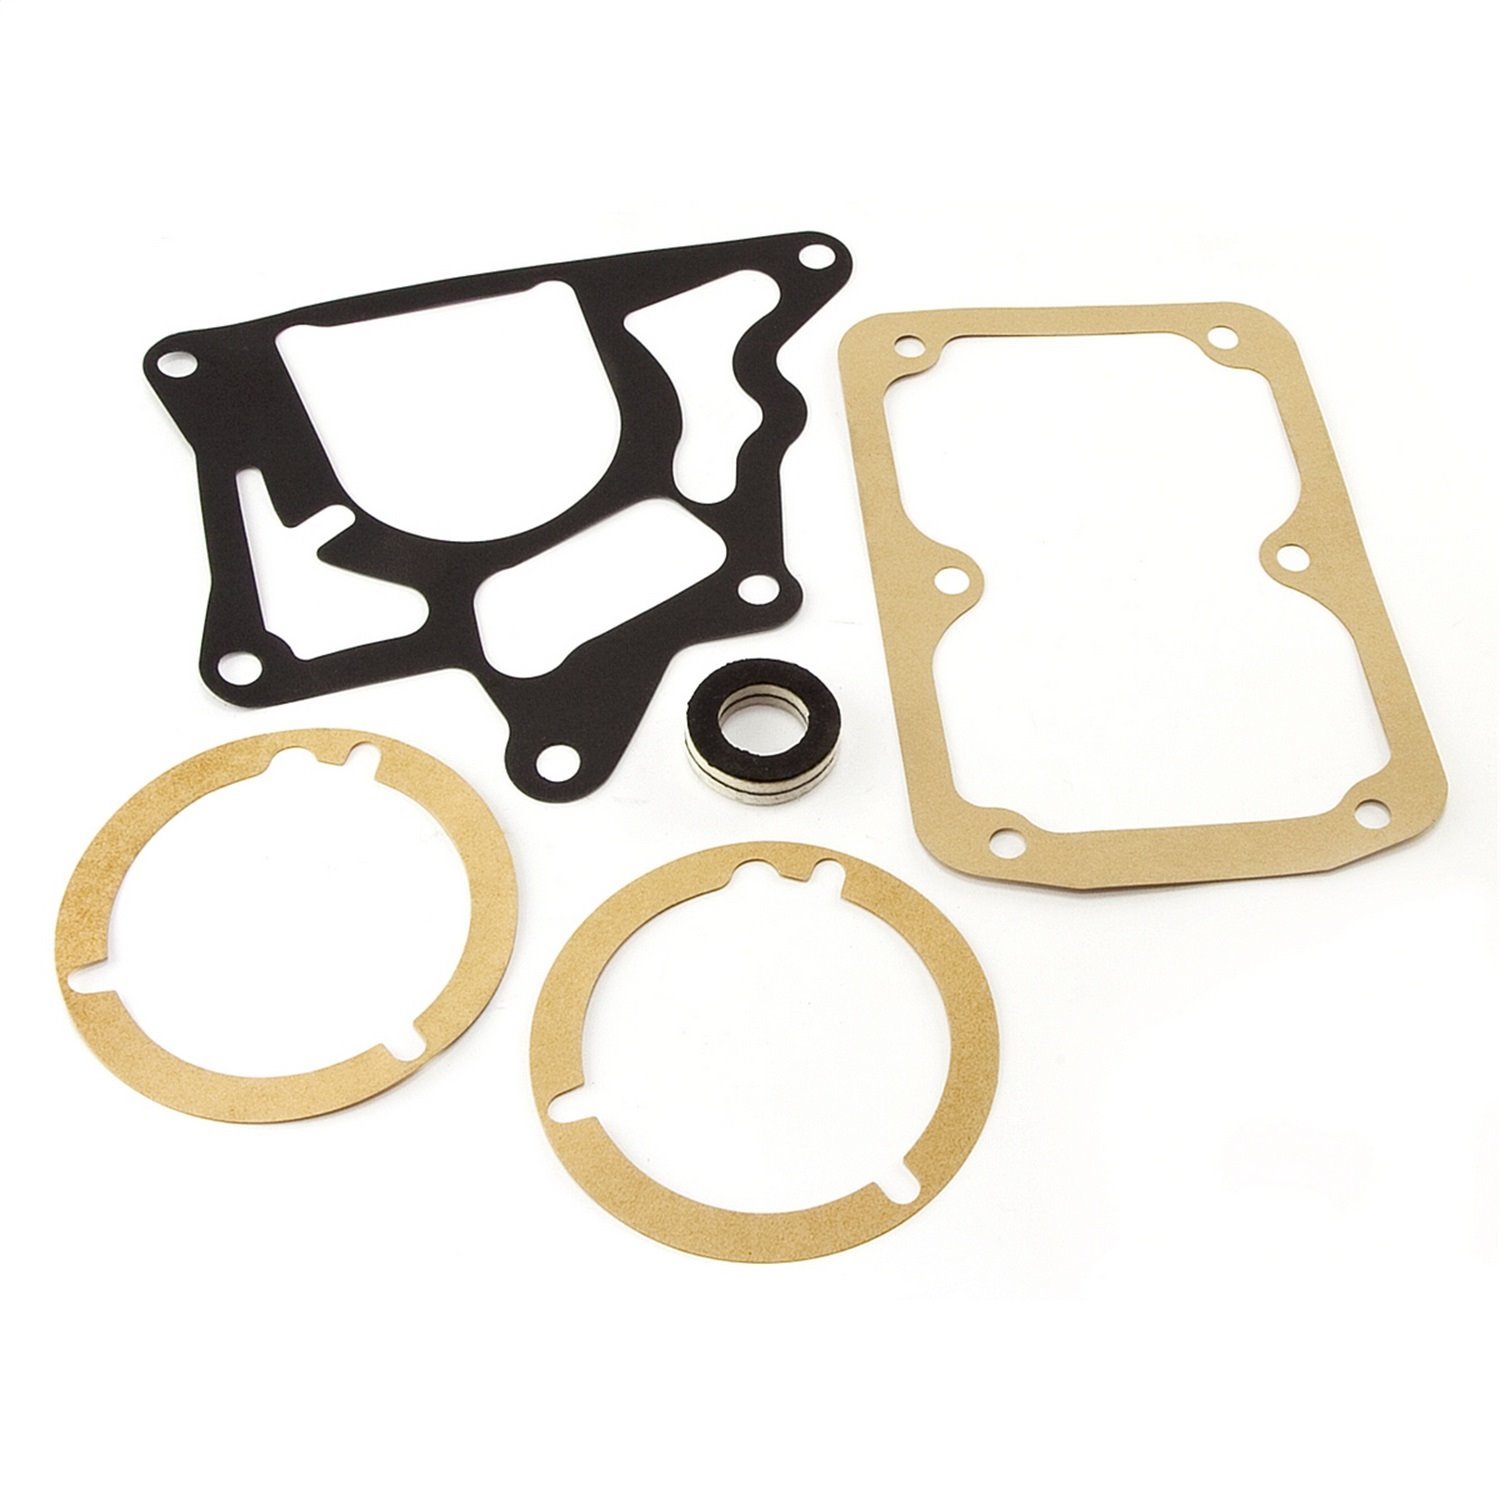 This 3-speed manual transmission seal kit from Omix-ADA fits 46-71 Willys vehicles with the T90 transmission.